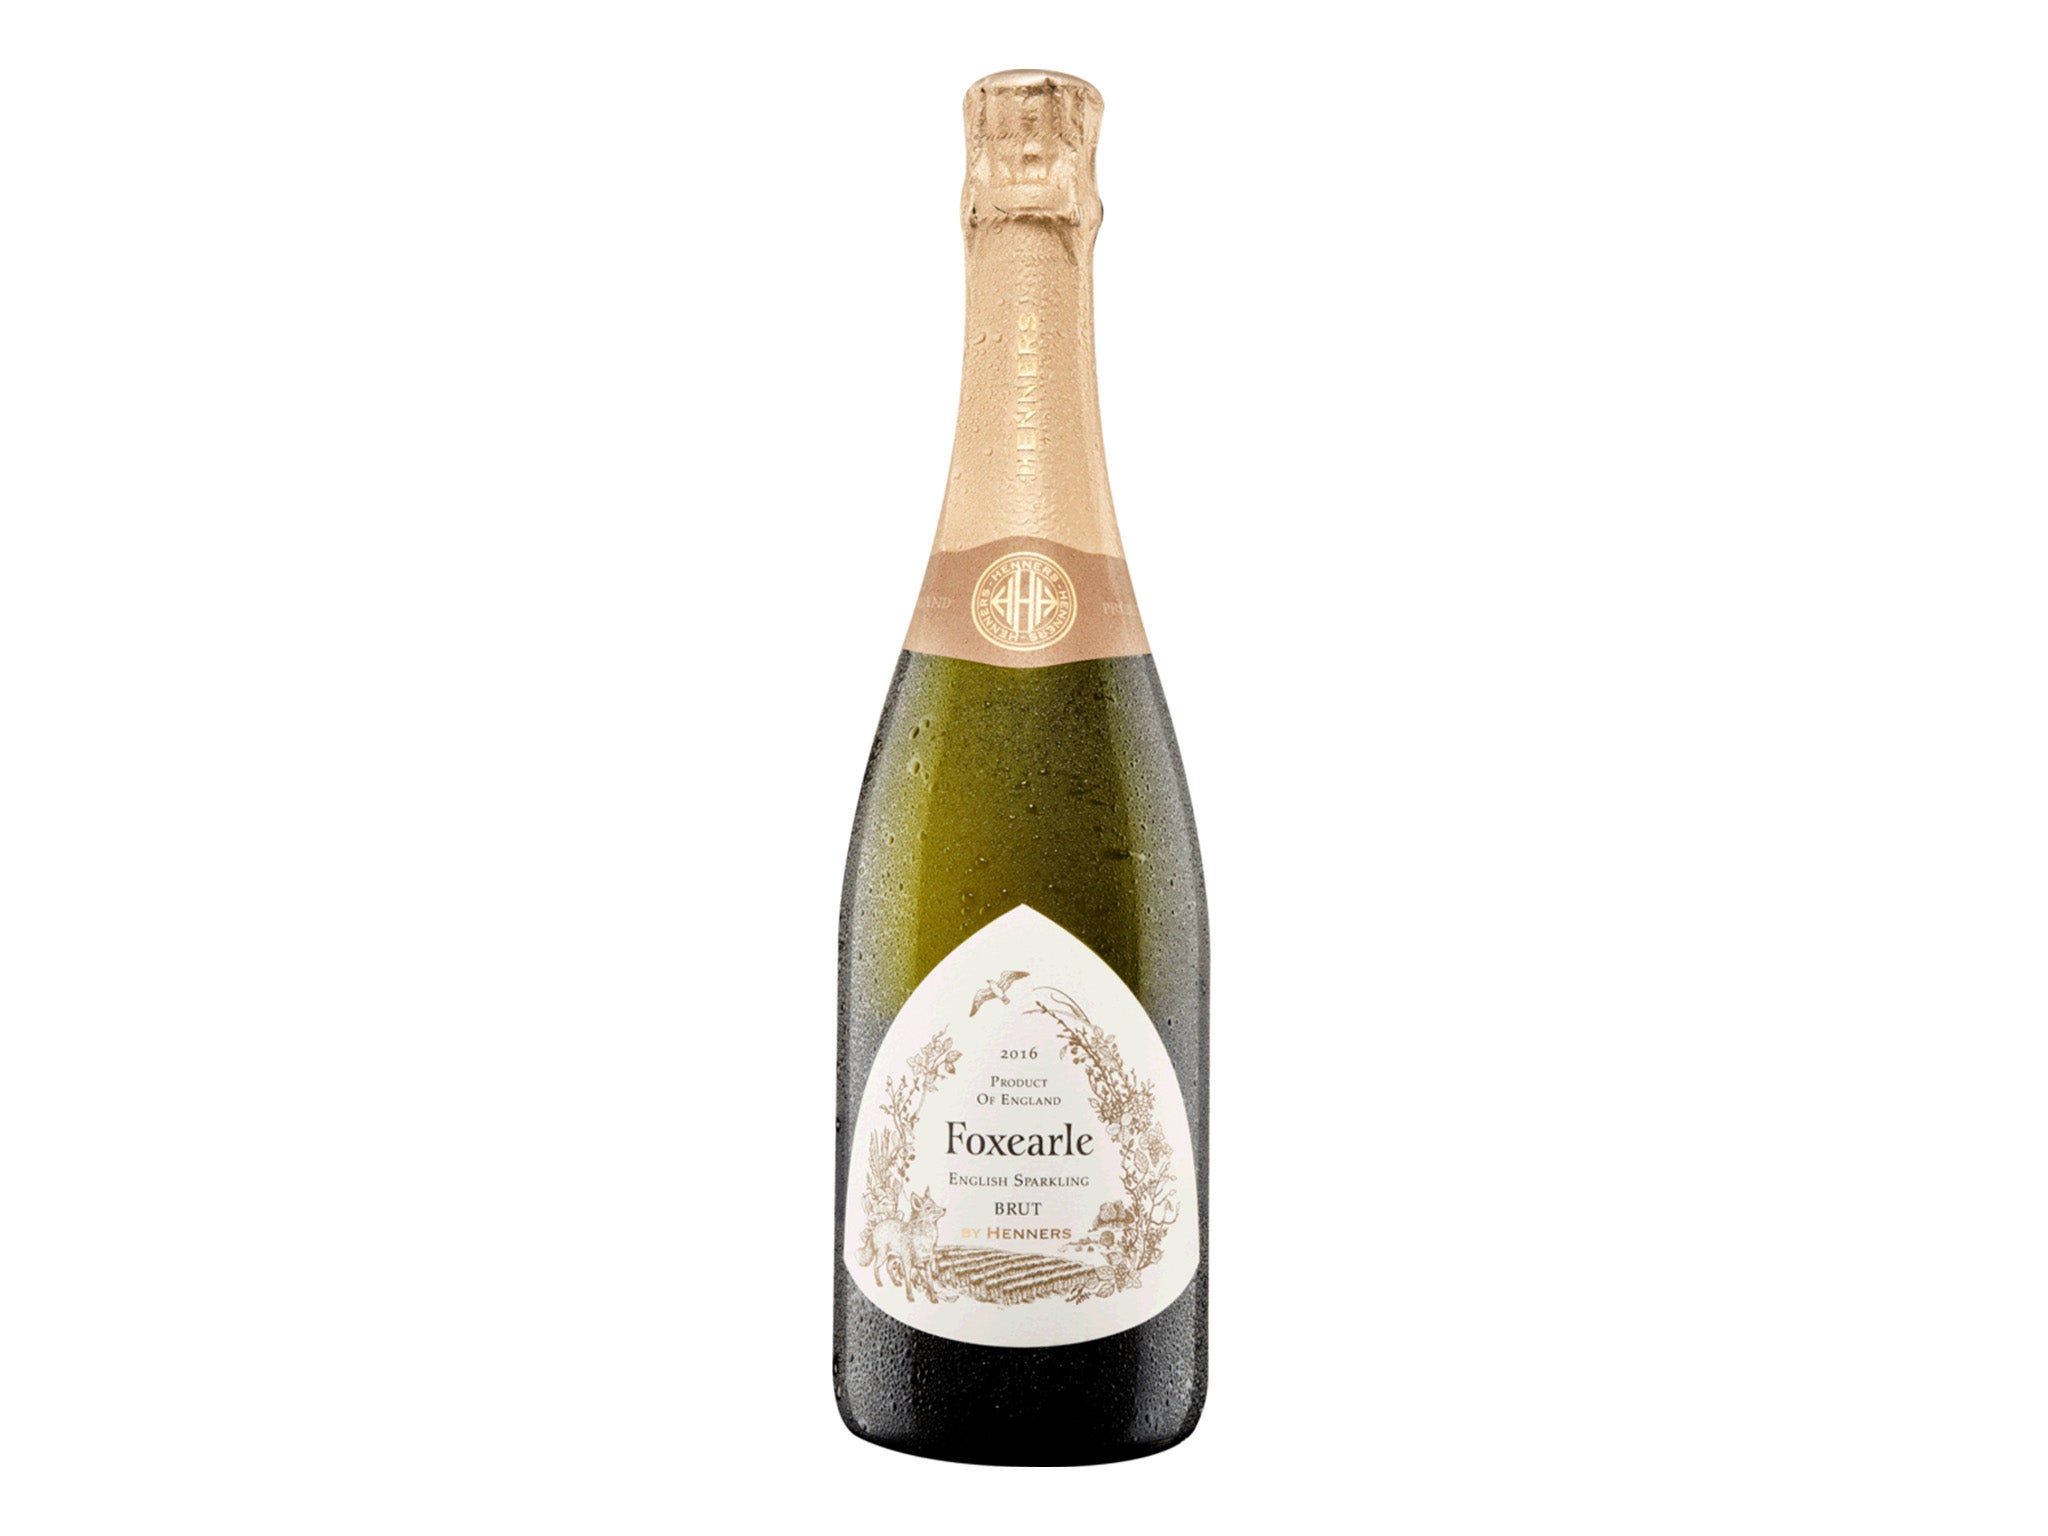 Henners Foxearle English sparkling brut 2016 .jpg